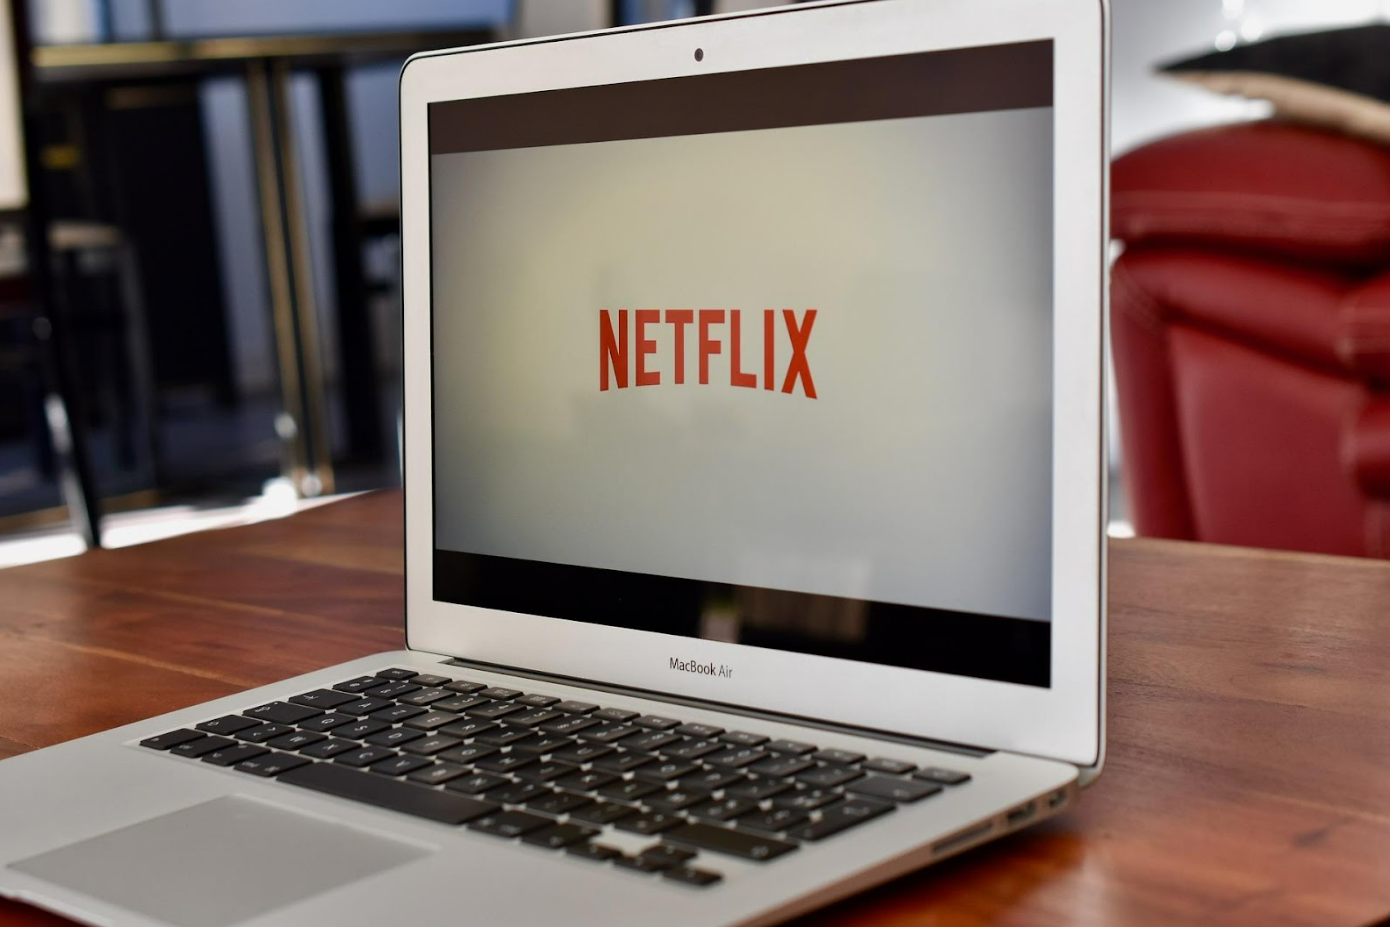 Microsoft-Netflix’s Ad Partnership: New Opportunity For Marketers?